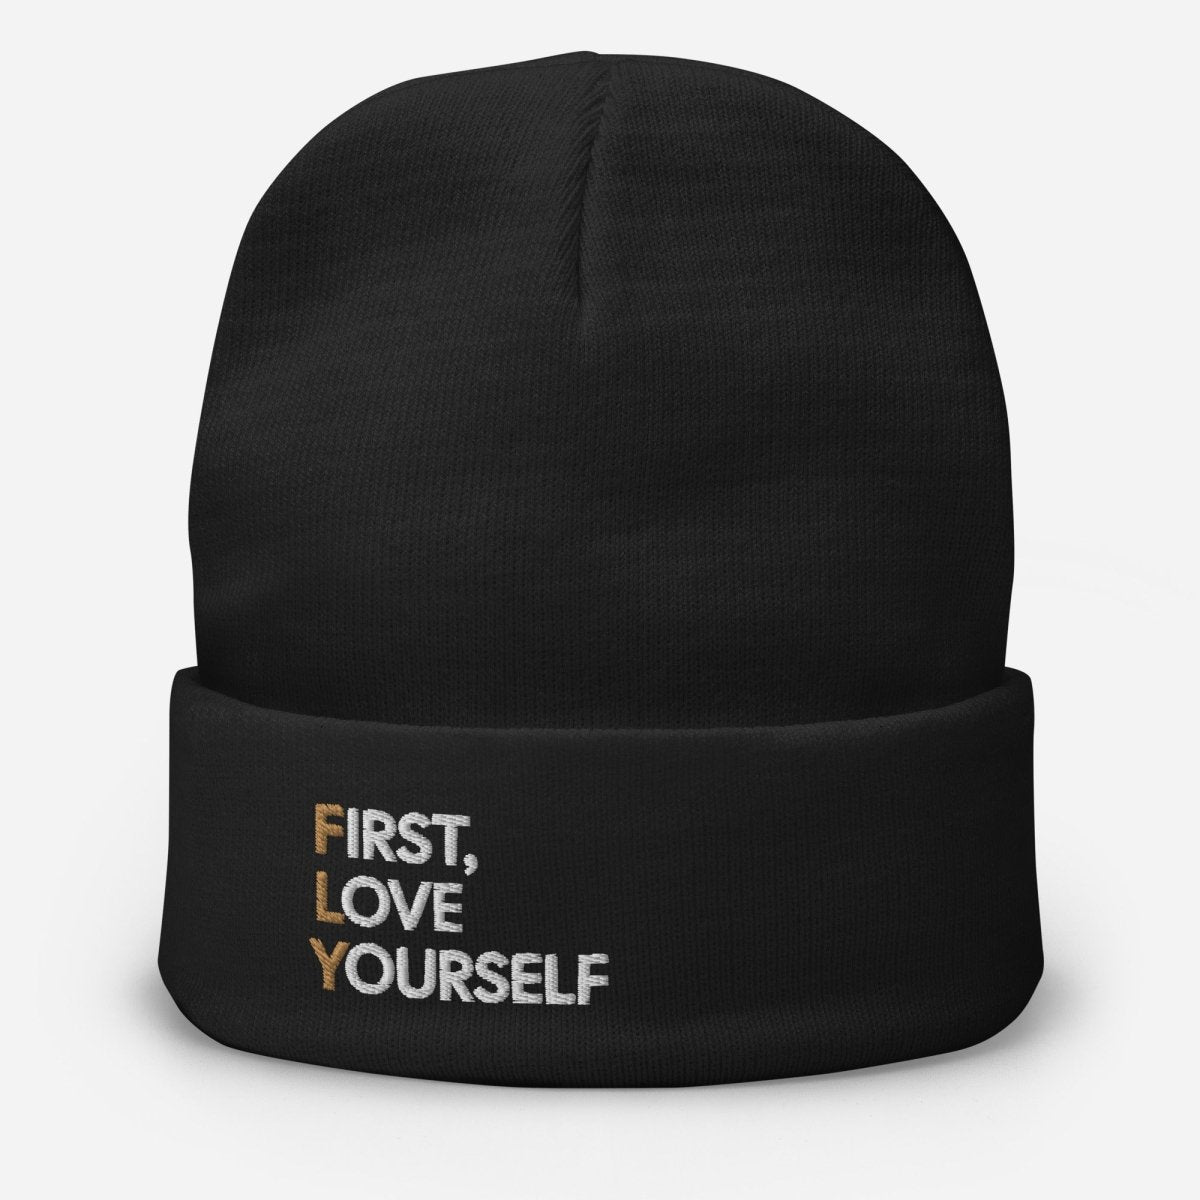 "First, Love Yourself" Embroidered Beanie - Sobervation